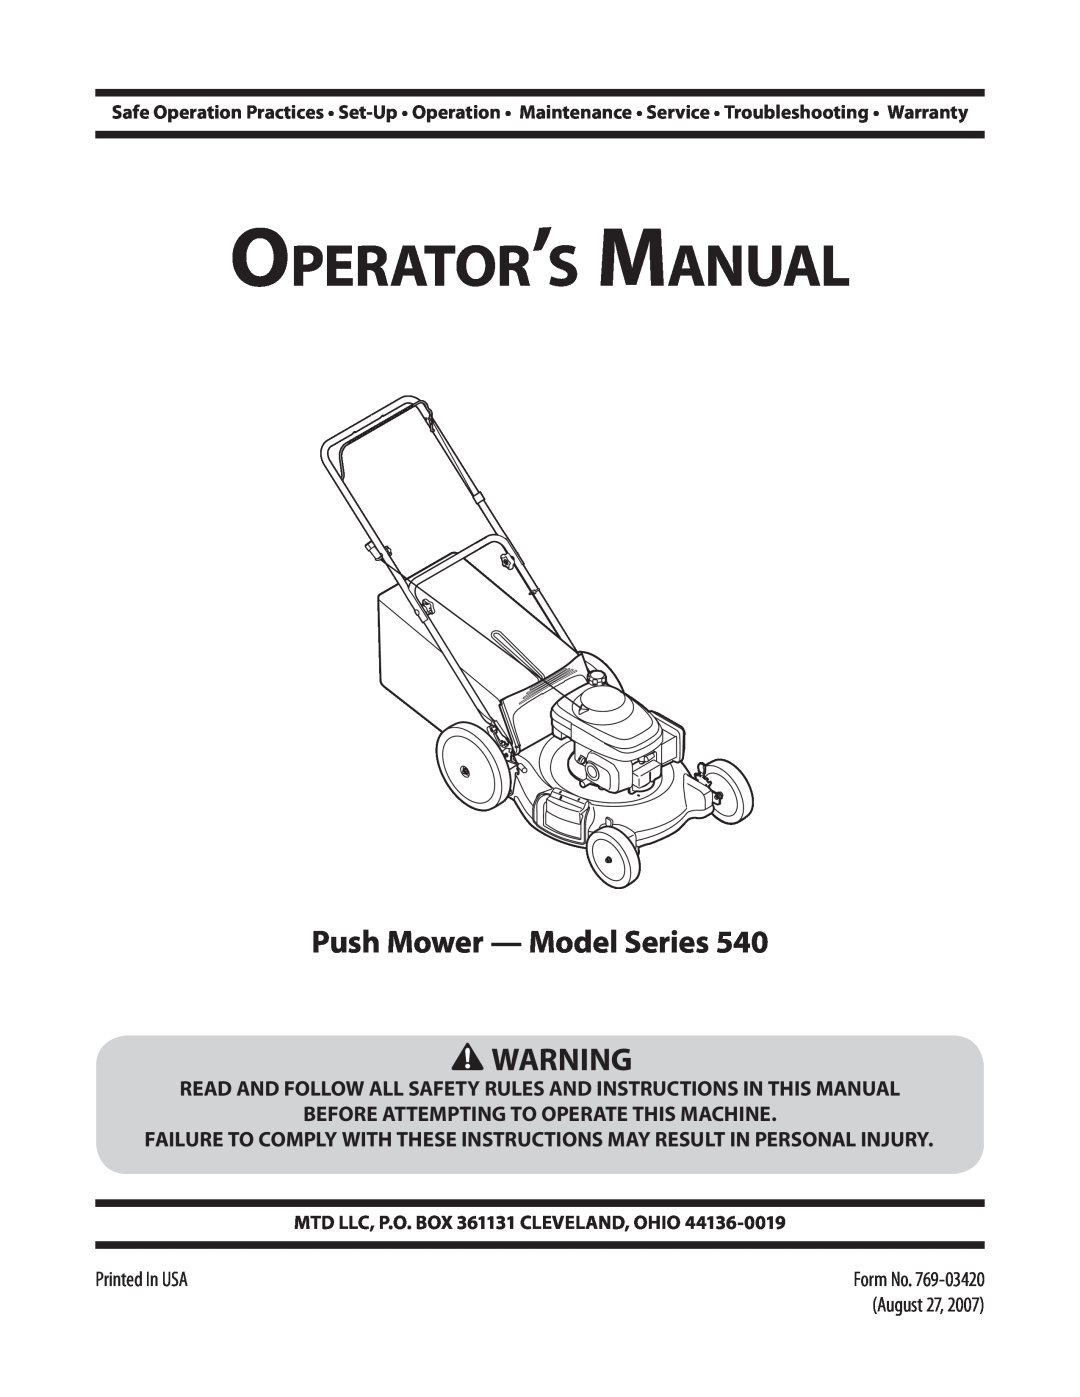 MTD 540 warranty Push Mower - Model Series, Read And Follow All Safety Rules And Instructions In This Manual 